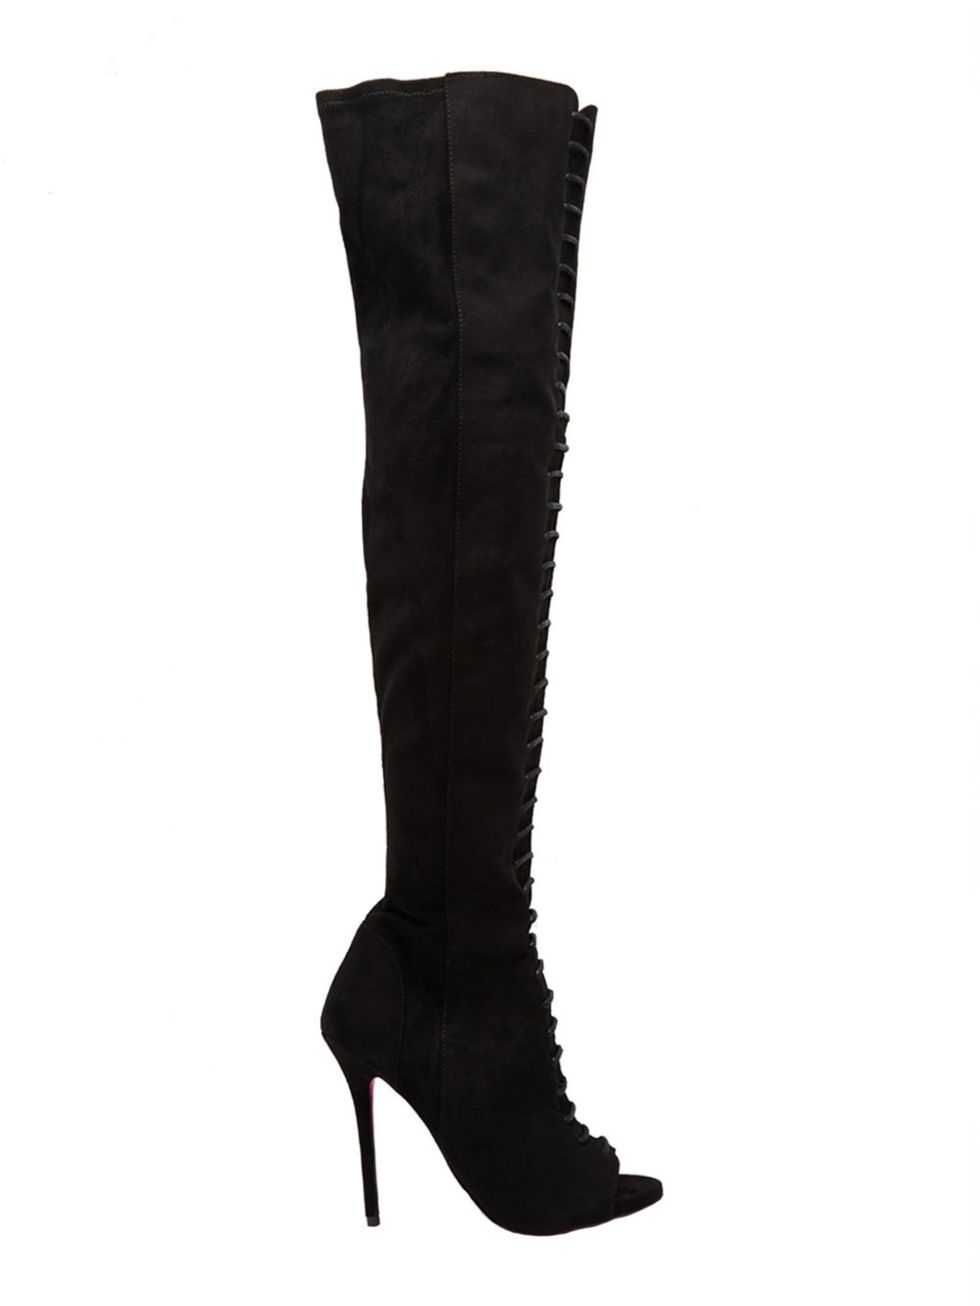 Boot, Costume accessory, Black, Leather, Knee-high boot, Fashion design, Foot, Synthetic rubber, Velvet, 